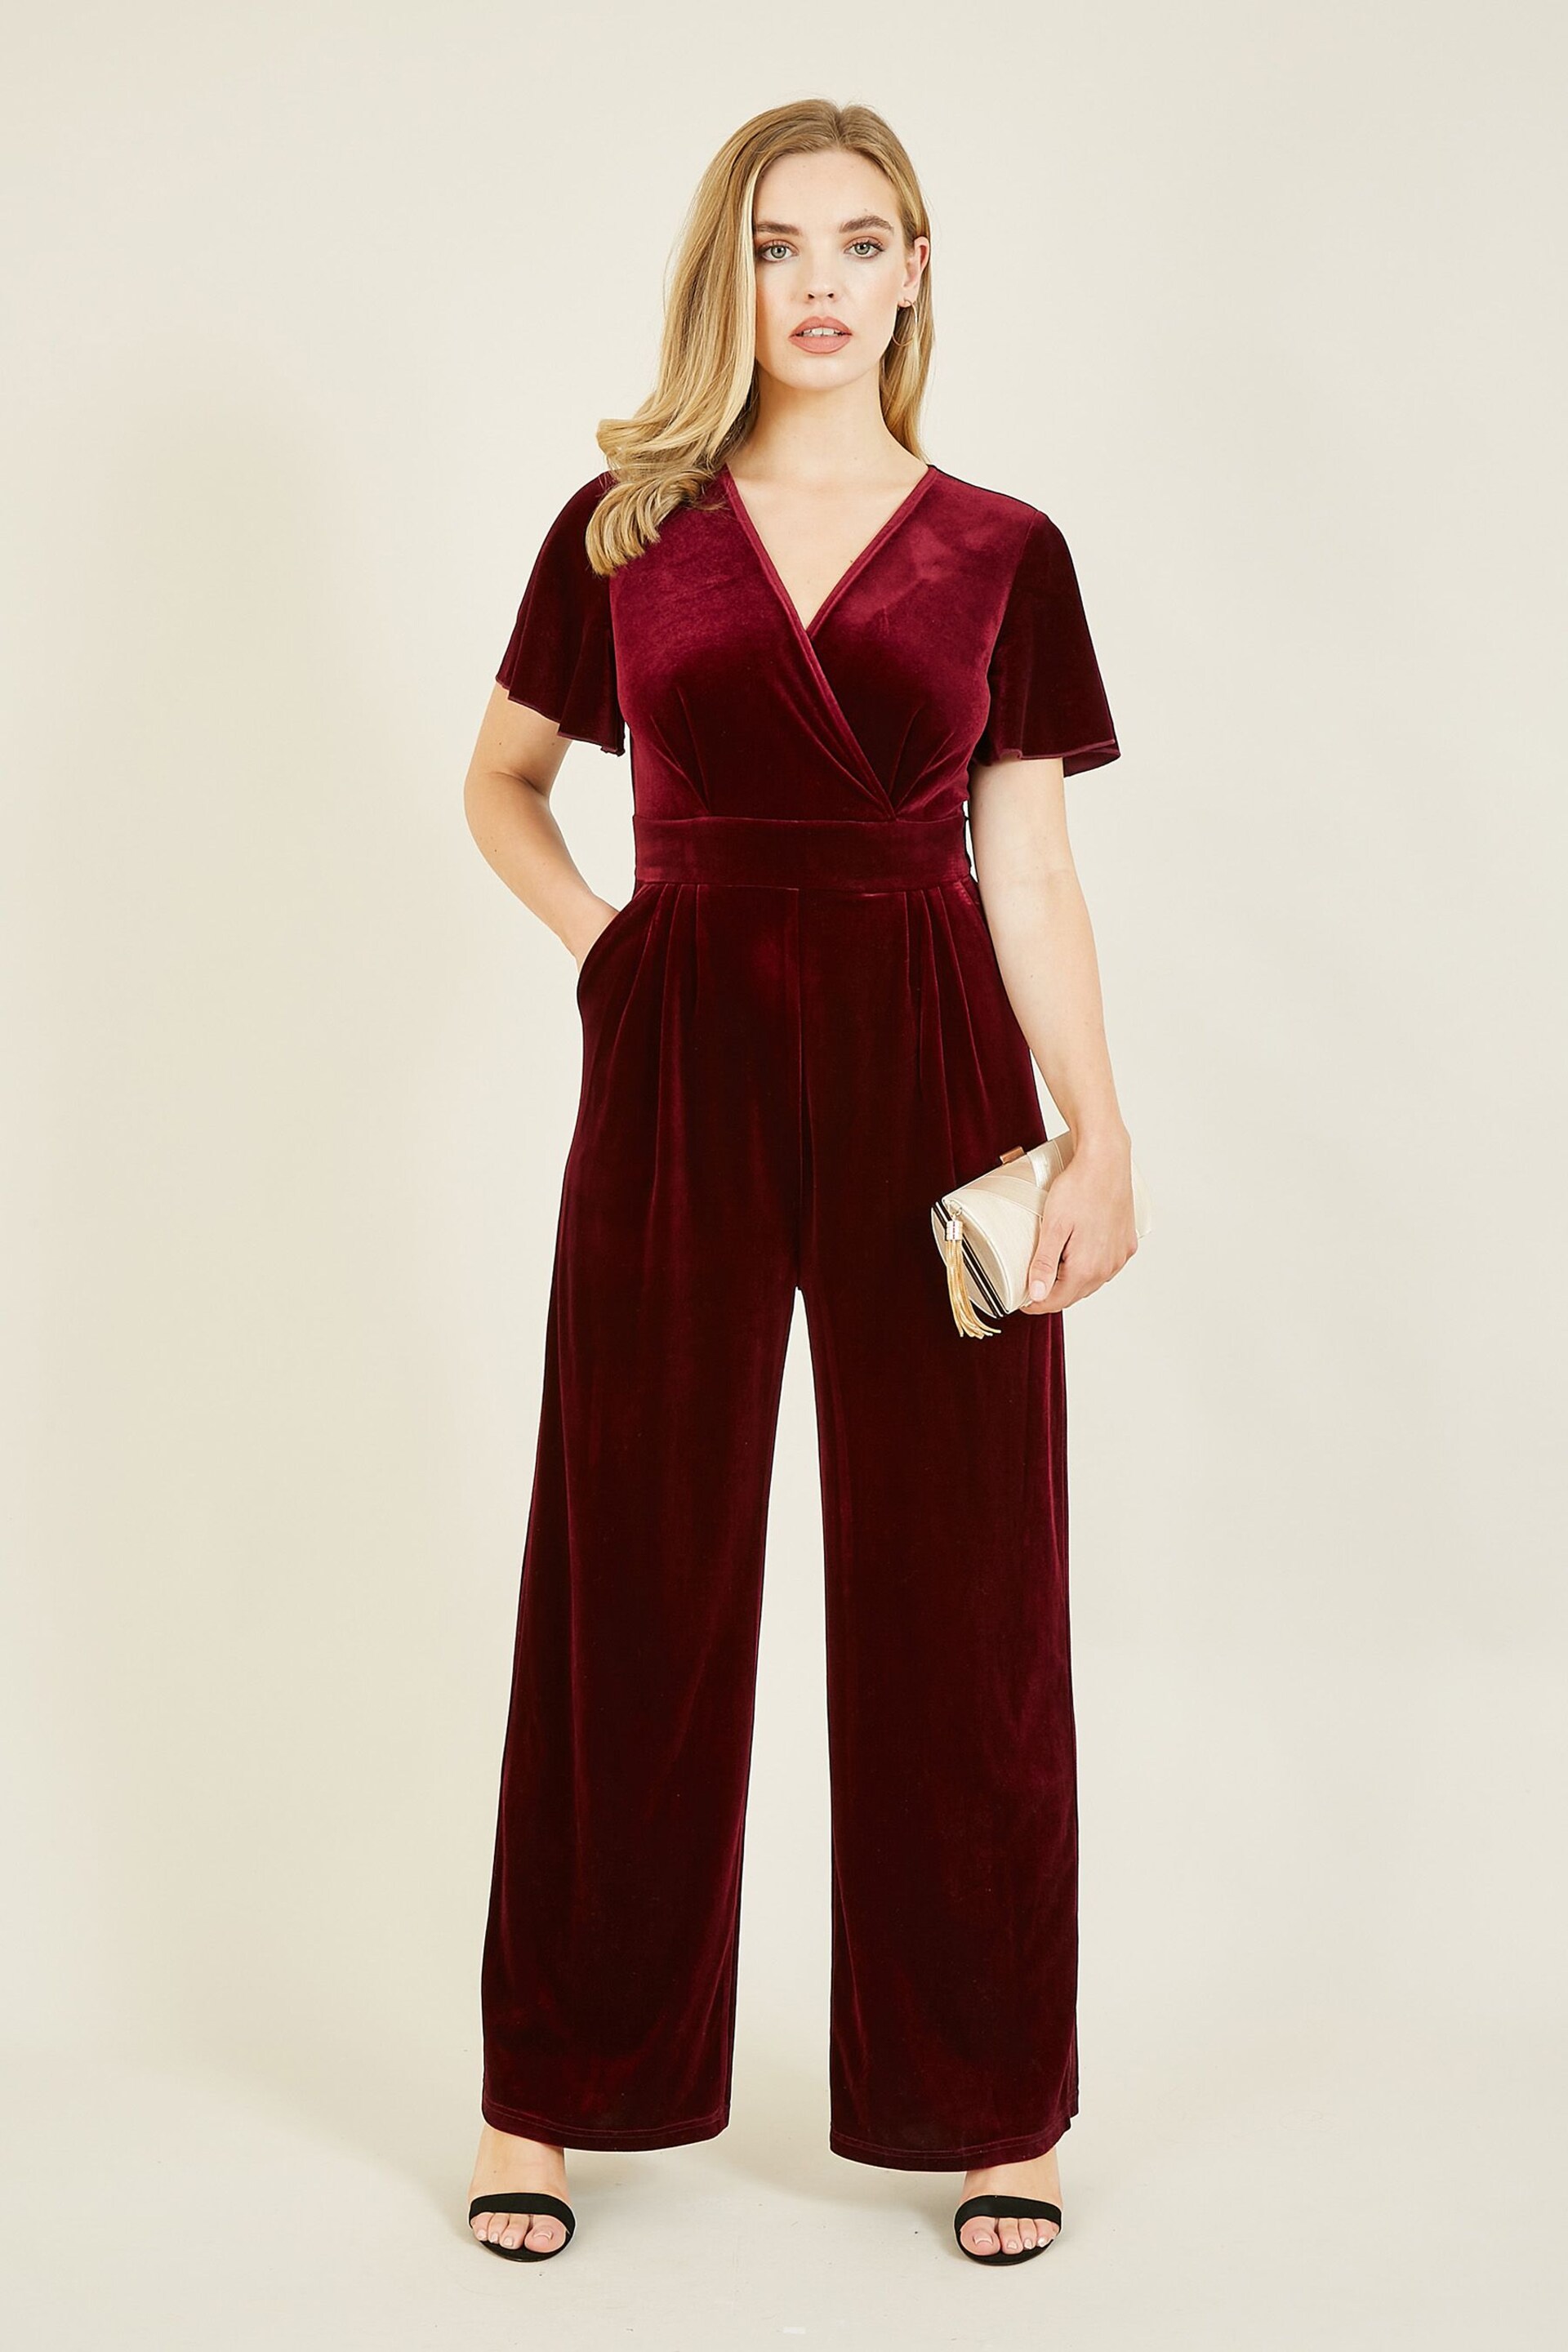 Yumi Purple Jumpsuit With Angel Sleeves - Image 1 of 4